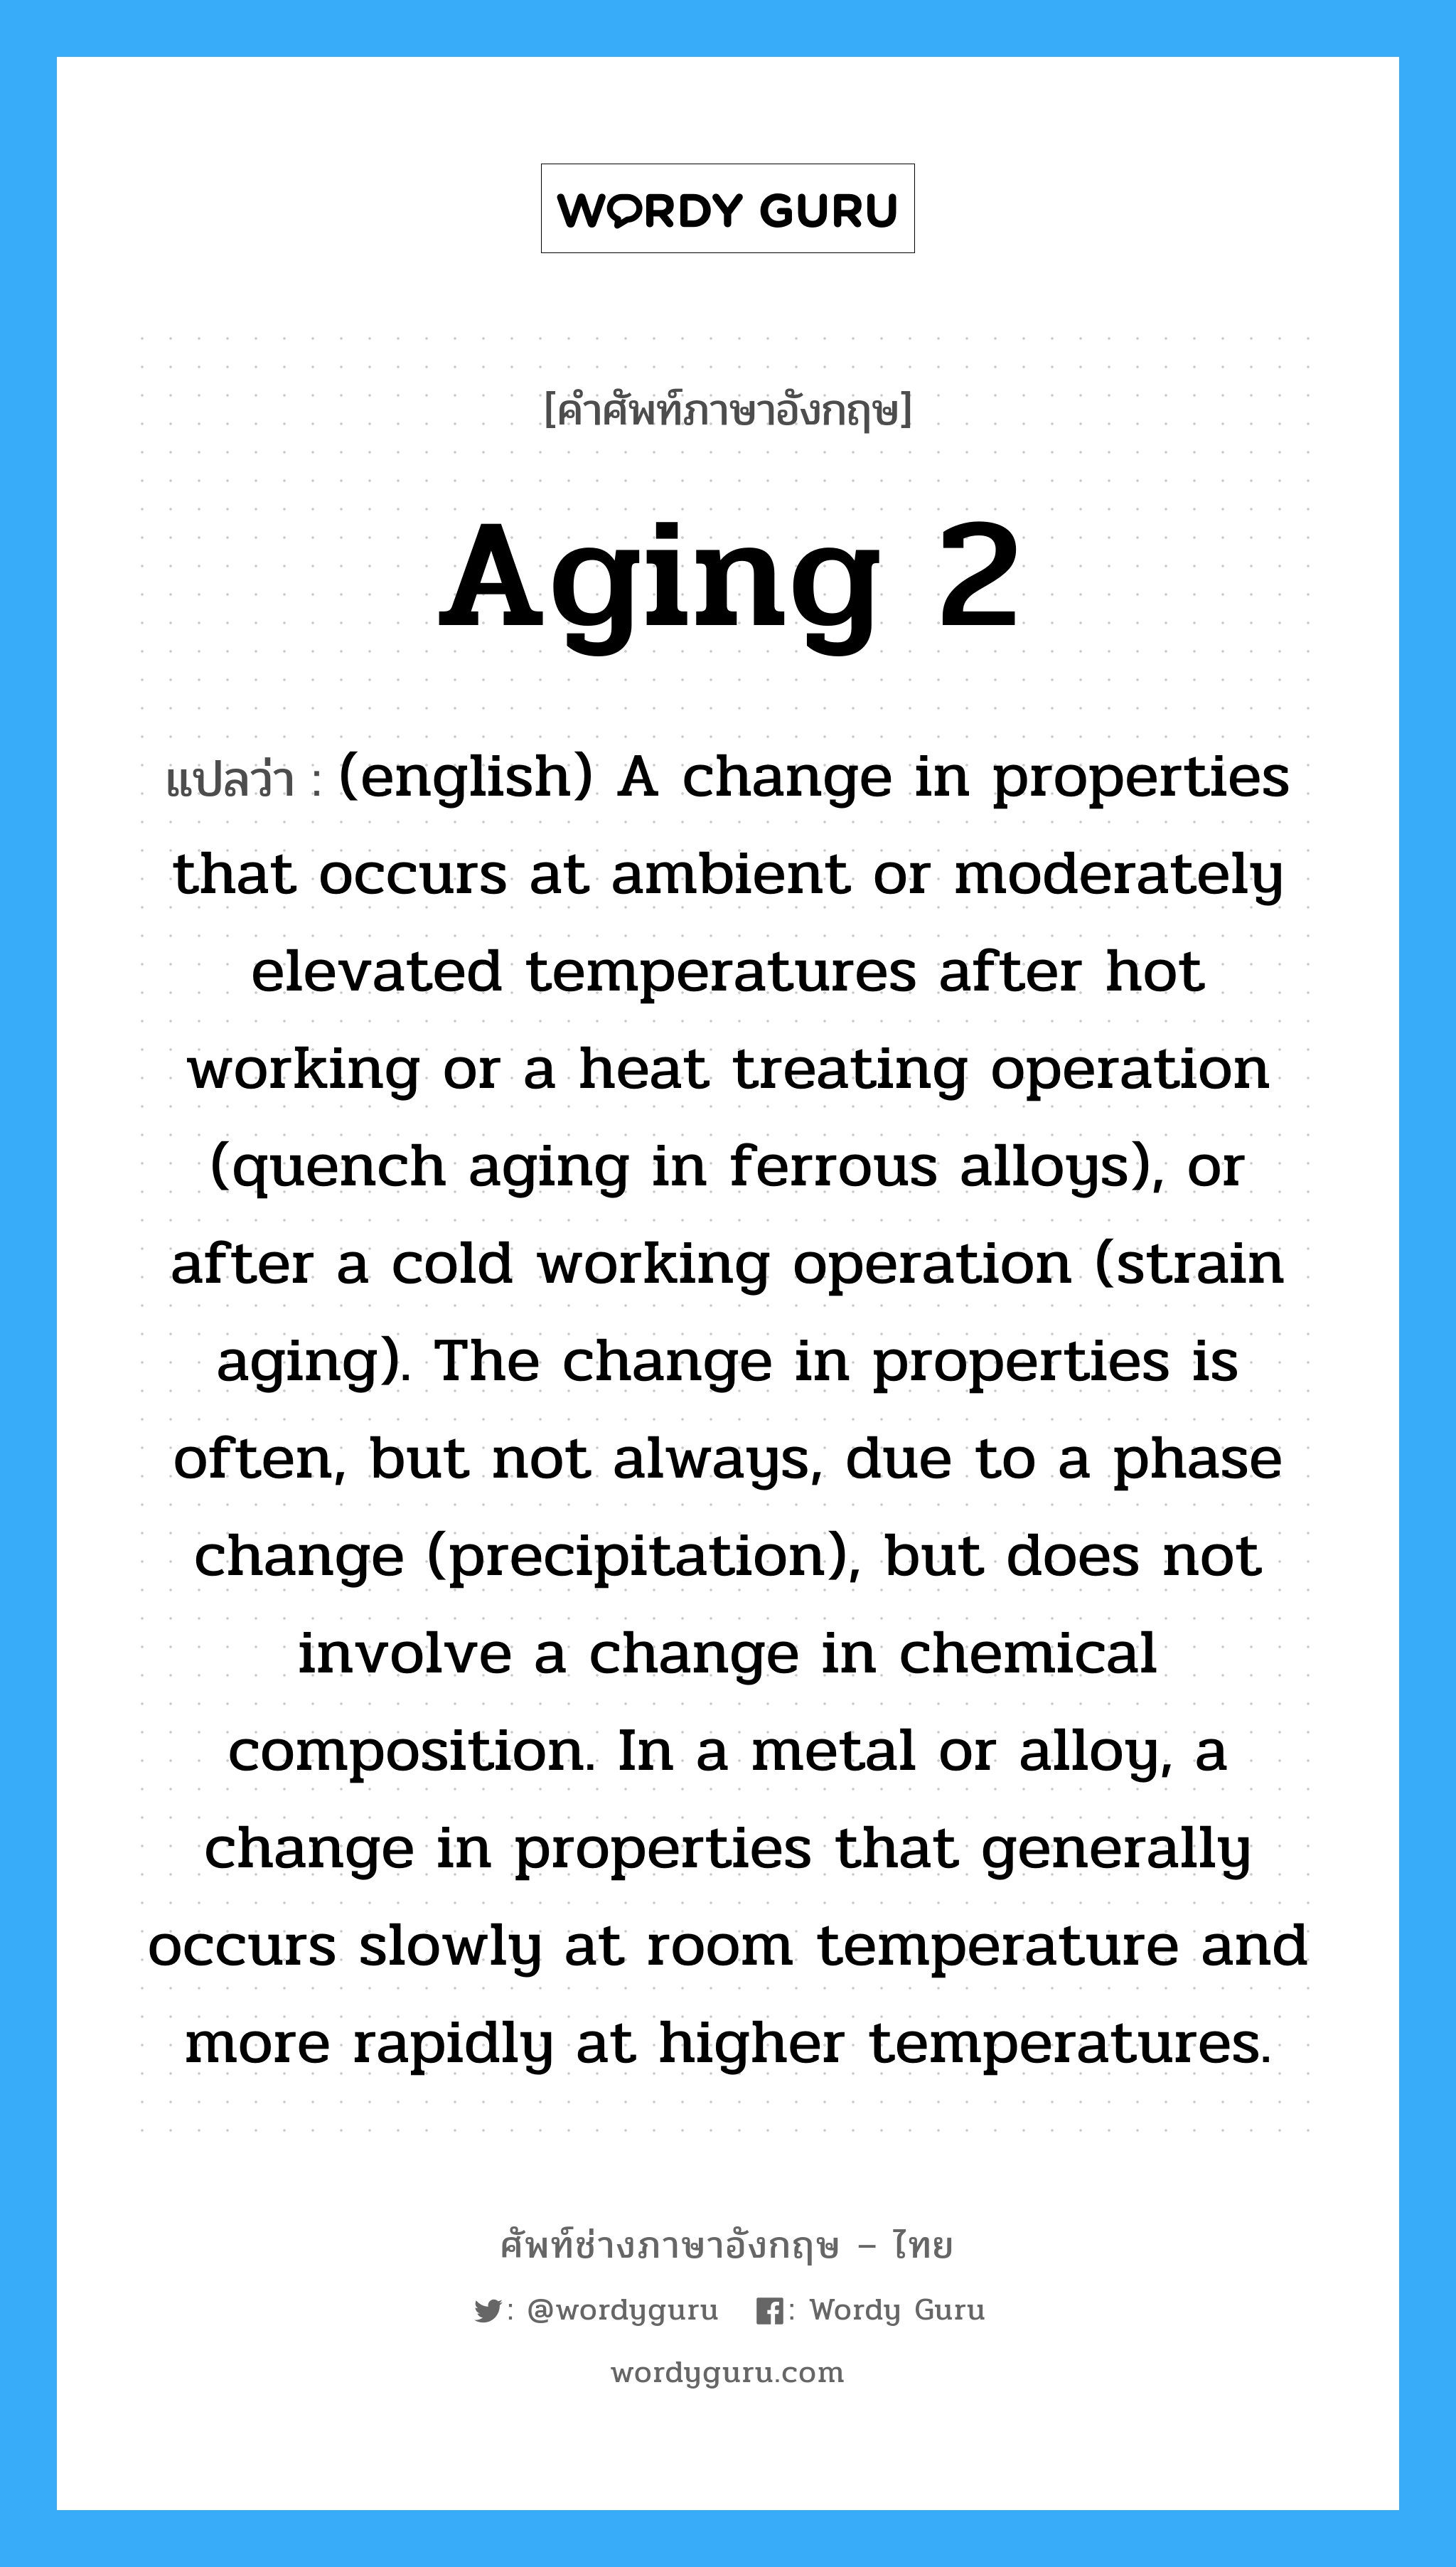 (english) A change in properties that occurs at ambient or moderately elevated temperatures after hot working or a heat treating operation (quench aging in ferrous alloys), or after a cold working operation (strain aging). The change in properties is often, but not always, due to a phase change (precipitation), but does not involve a change in chemical composition. In a metal or alloy, a change in properties that generally occurs slowly at room temperature and more rapidly at higher temperatures. ภาษาอังกฤษ?, คำศัพท์ช่างภาษาอังกฤษ - ไทย (english) A change in properties that occurs at ambient or moderately elevated temperatures after hot working or a heat treating operation (quench aging in ferrous alloys), or after a cold working operation (strain aging). The change in properties is often, but not always, due to a phase change (precipitation), but does not involve a change in chemical composition. In a metal or alloy, a change in properties that generally occurs slowly at room temperature and more rapidly at higher temperatures. คำศัพท์ภาษาอังกฤษ (english) A change in properties that occurs at ambient or moderately elevated temperatures after hot working or a heat treating operation (quench aging in ferrous alloys), or after a cold working operation (strain aging). The change in properties is often, but not always, due to a phase change (precipitation), but does not involve a change in chemical composition. In a metal or alloy, a change in properties that generally occurs slowly at room temperature and more rapidly at higher temperatures. แปลว่า Aging 2